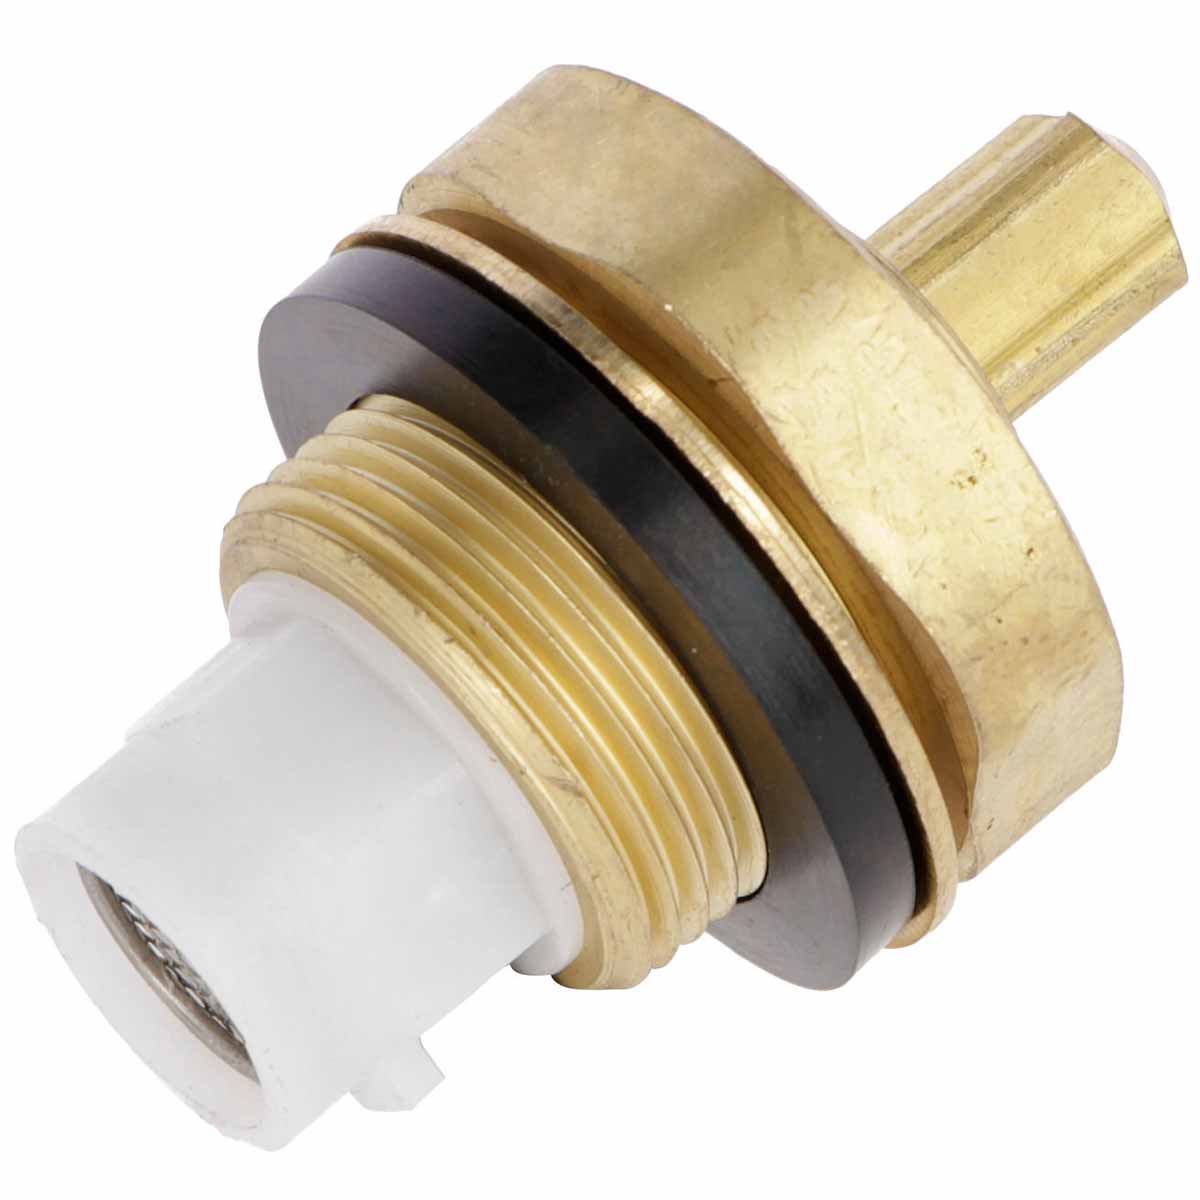 High-pressure valve replacement for water bowls